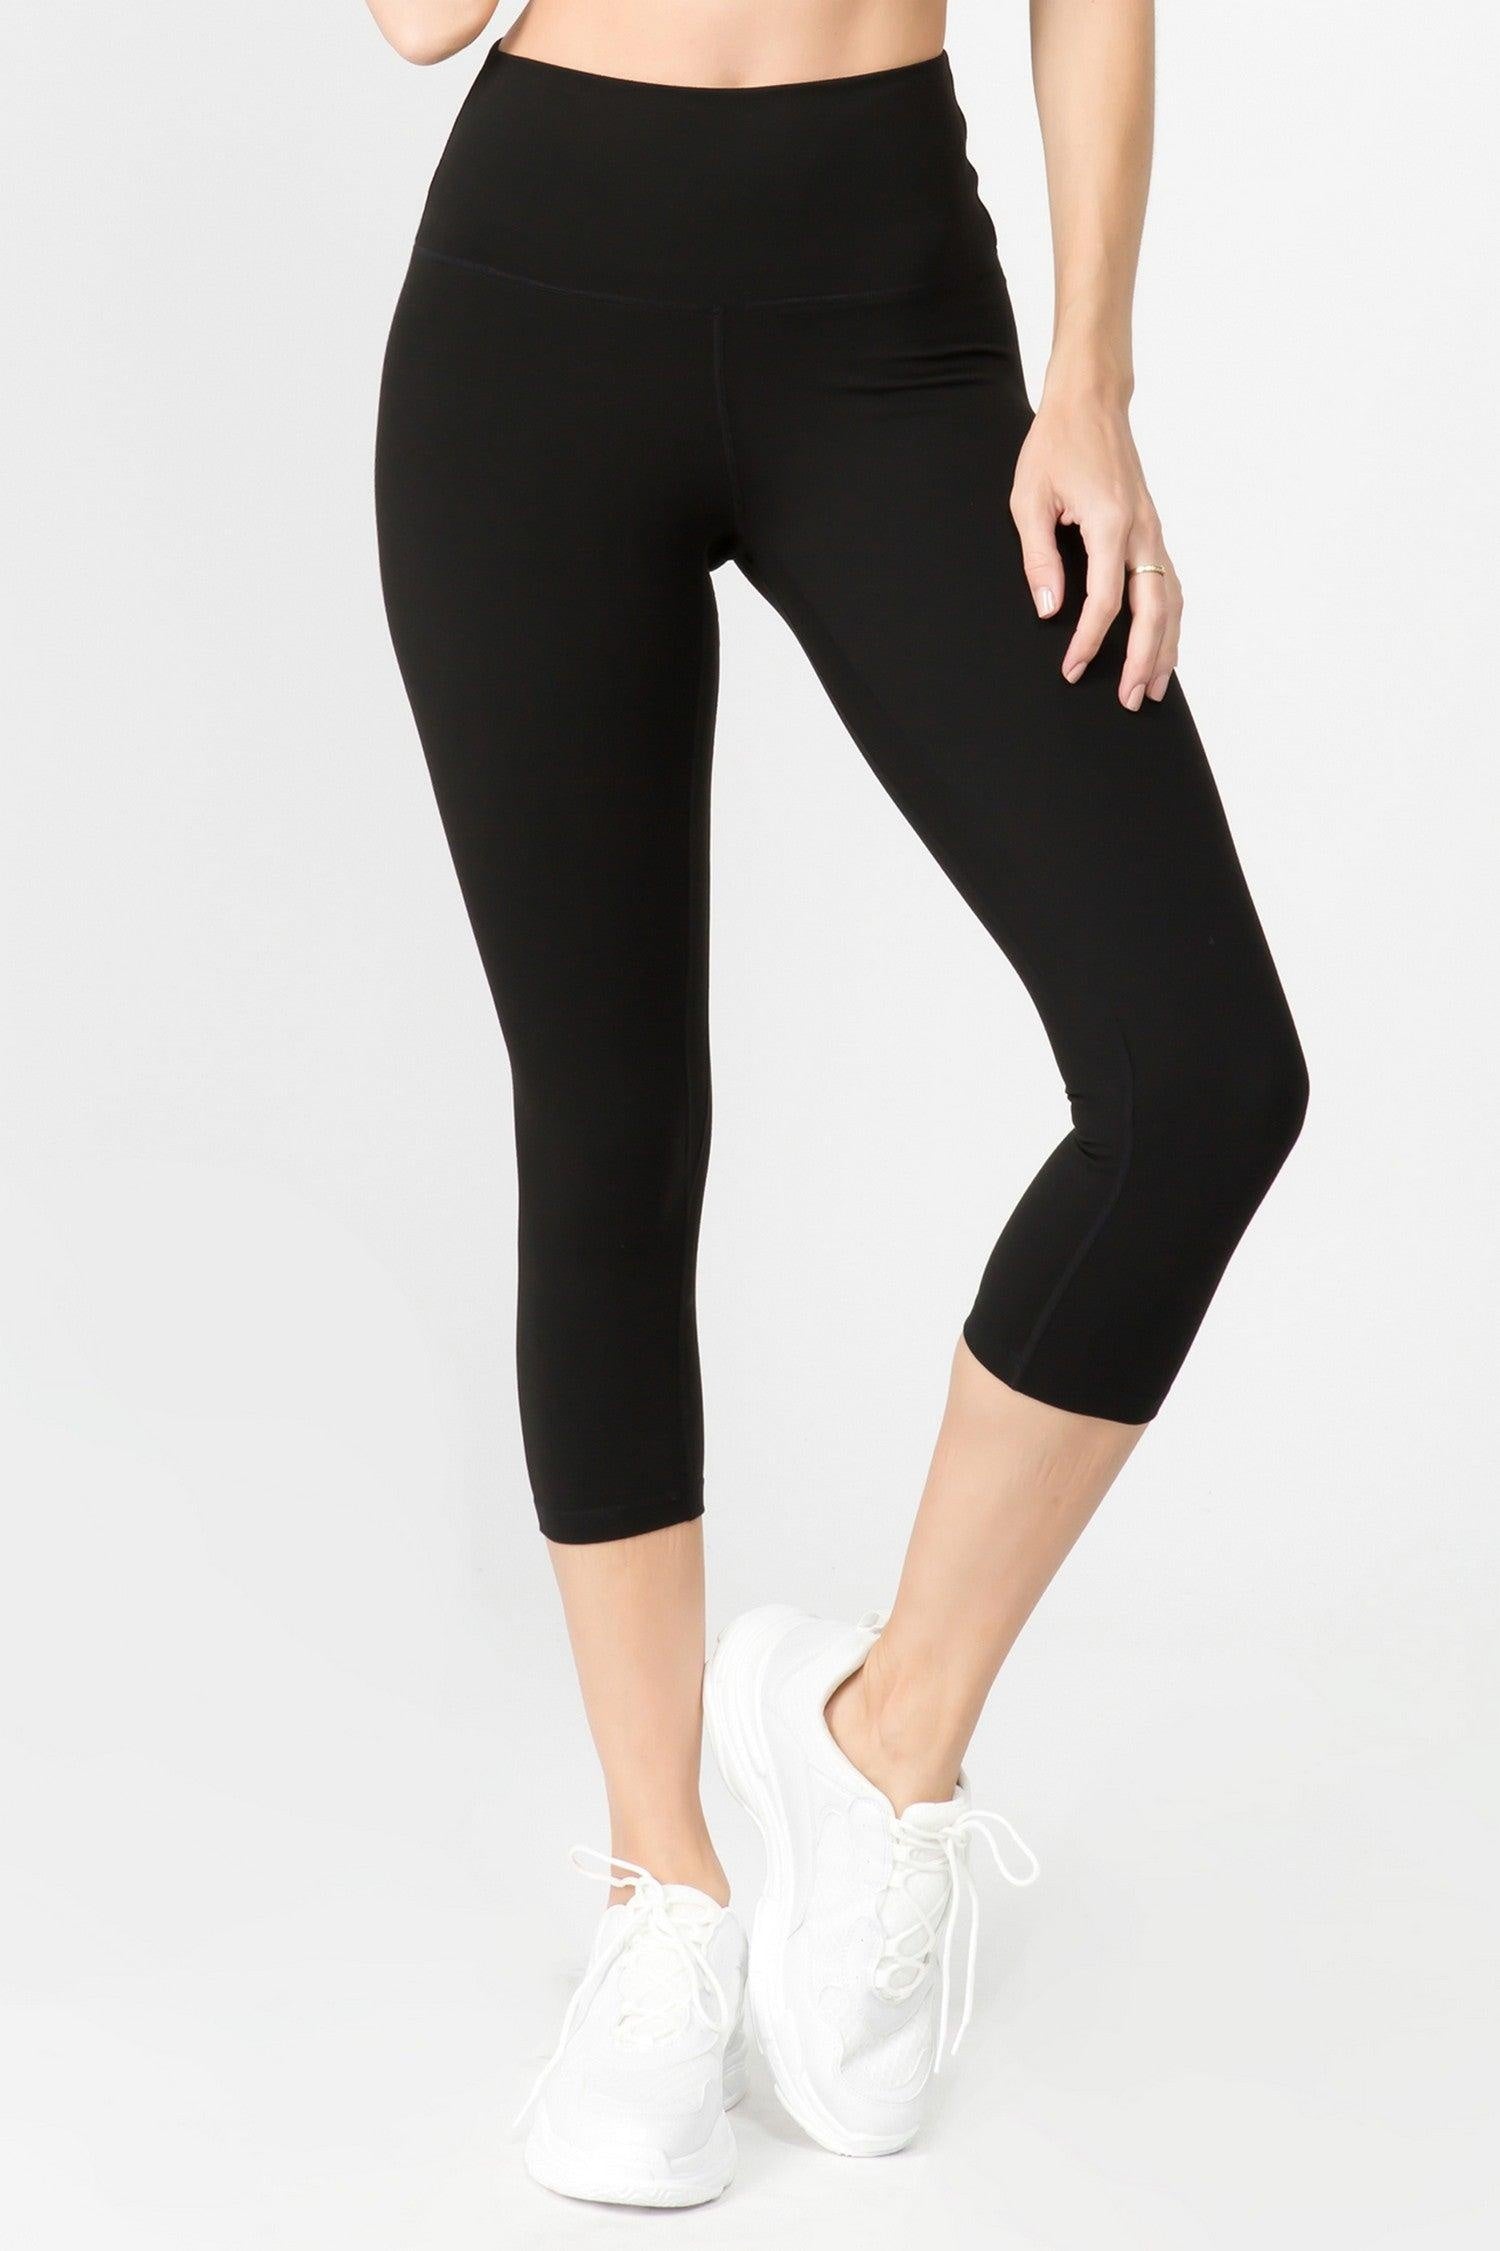 Yelete Skinny Fit High Rise Legging (Women's), 1 Count, 1 Pack